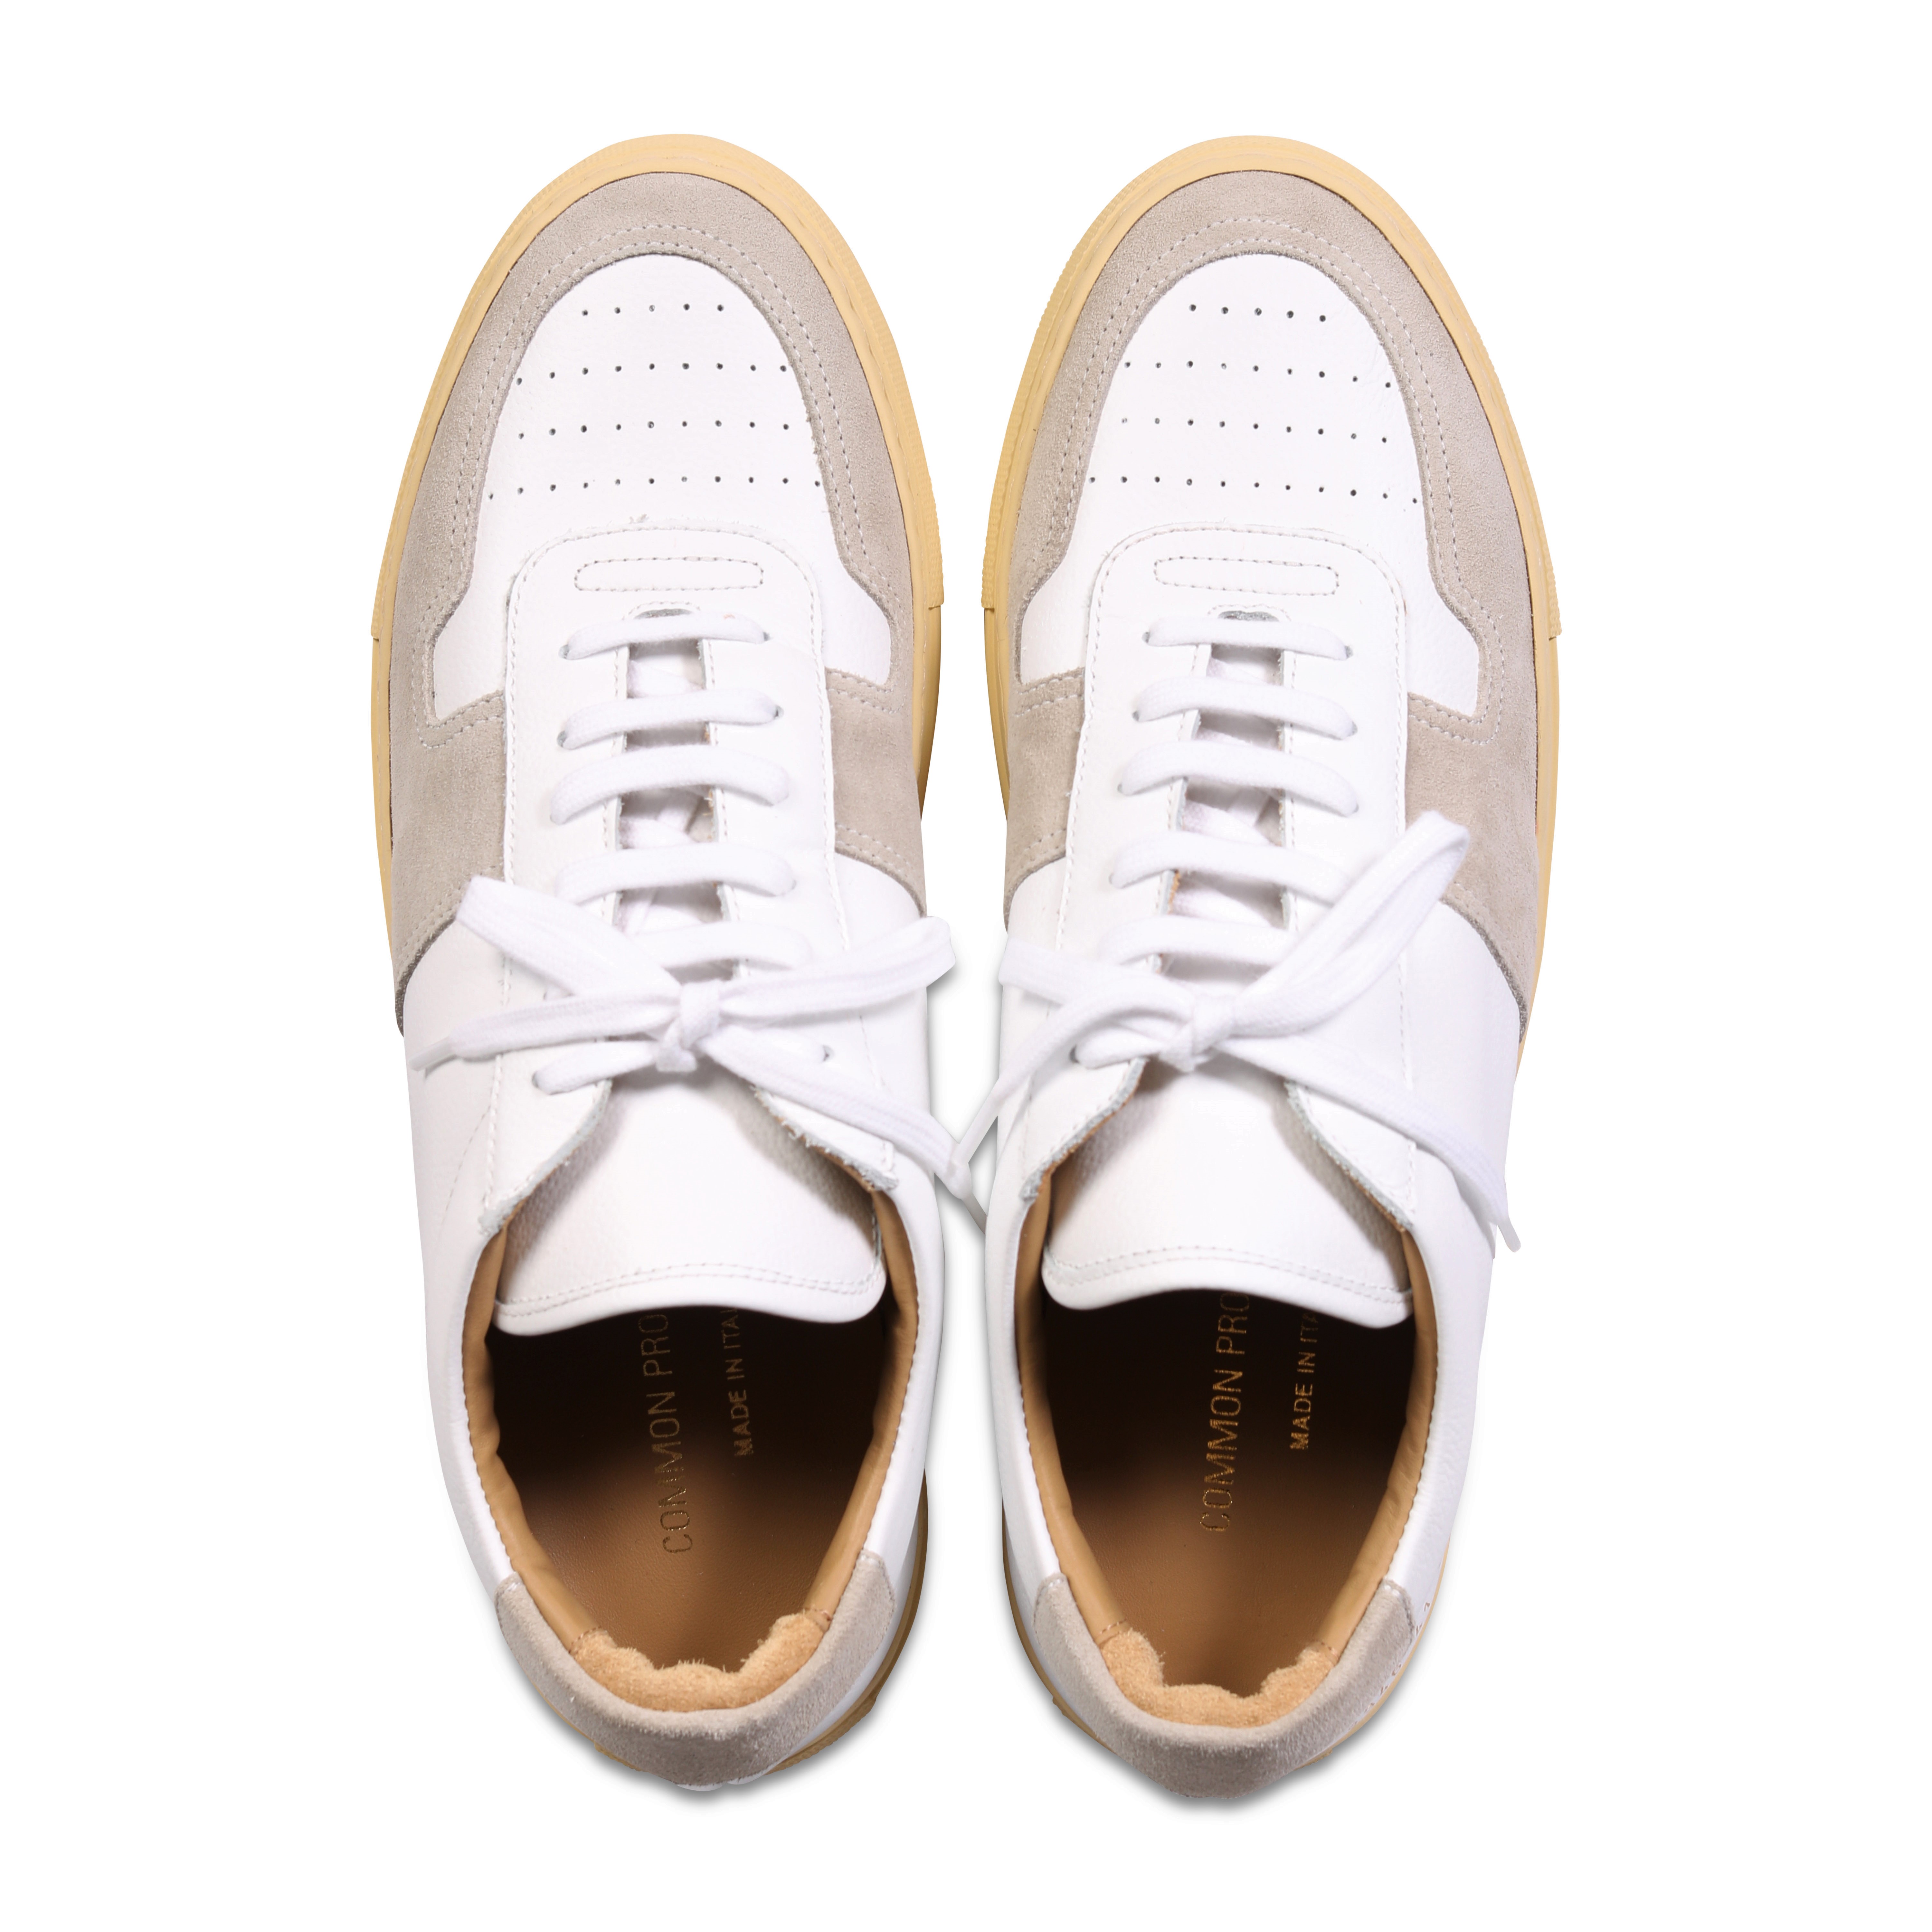 Common Projects Sneaker Bball Low Multi 47